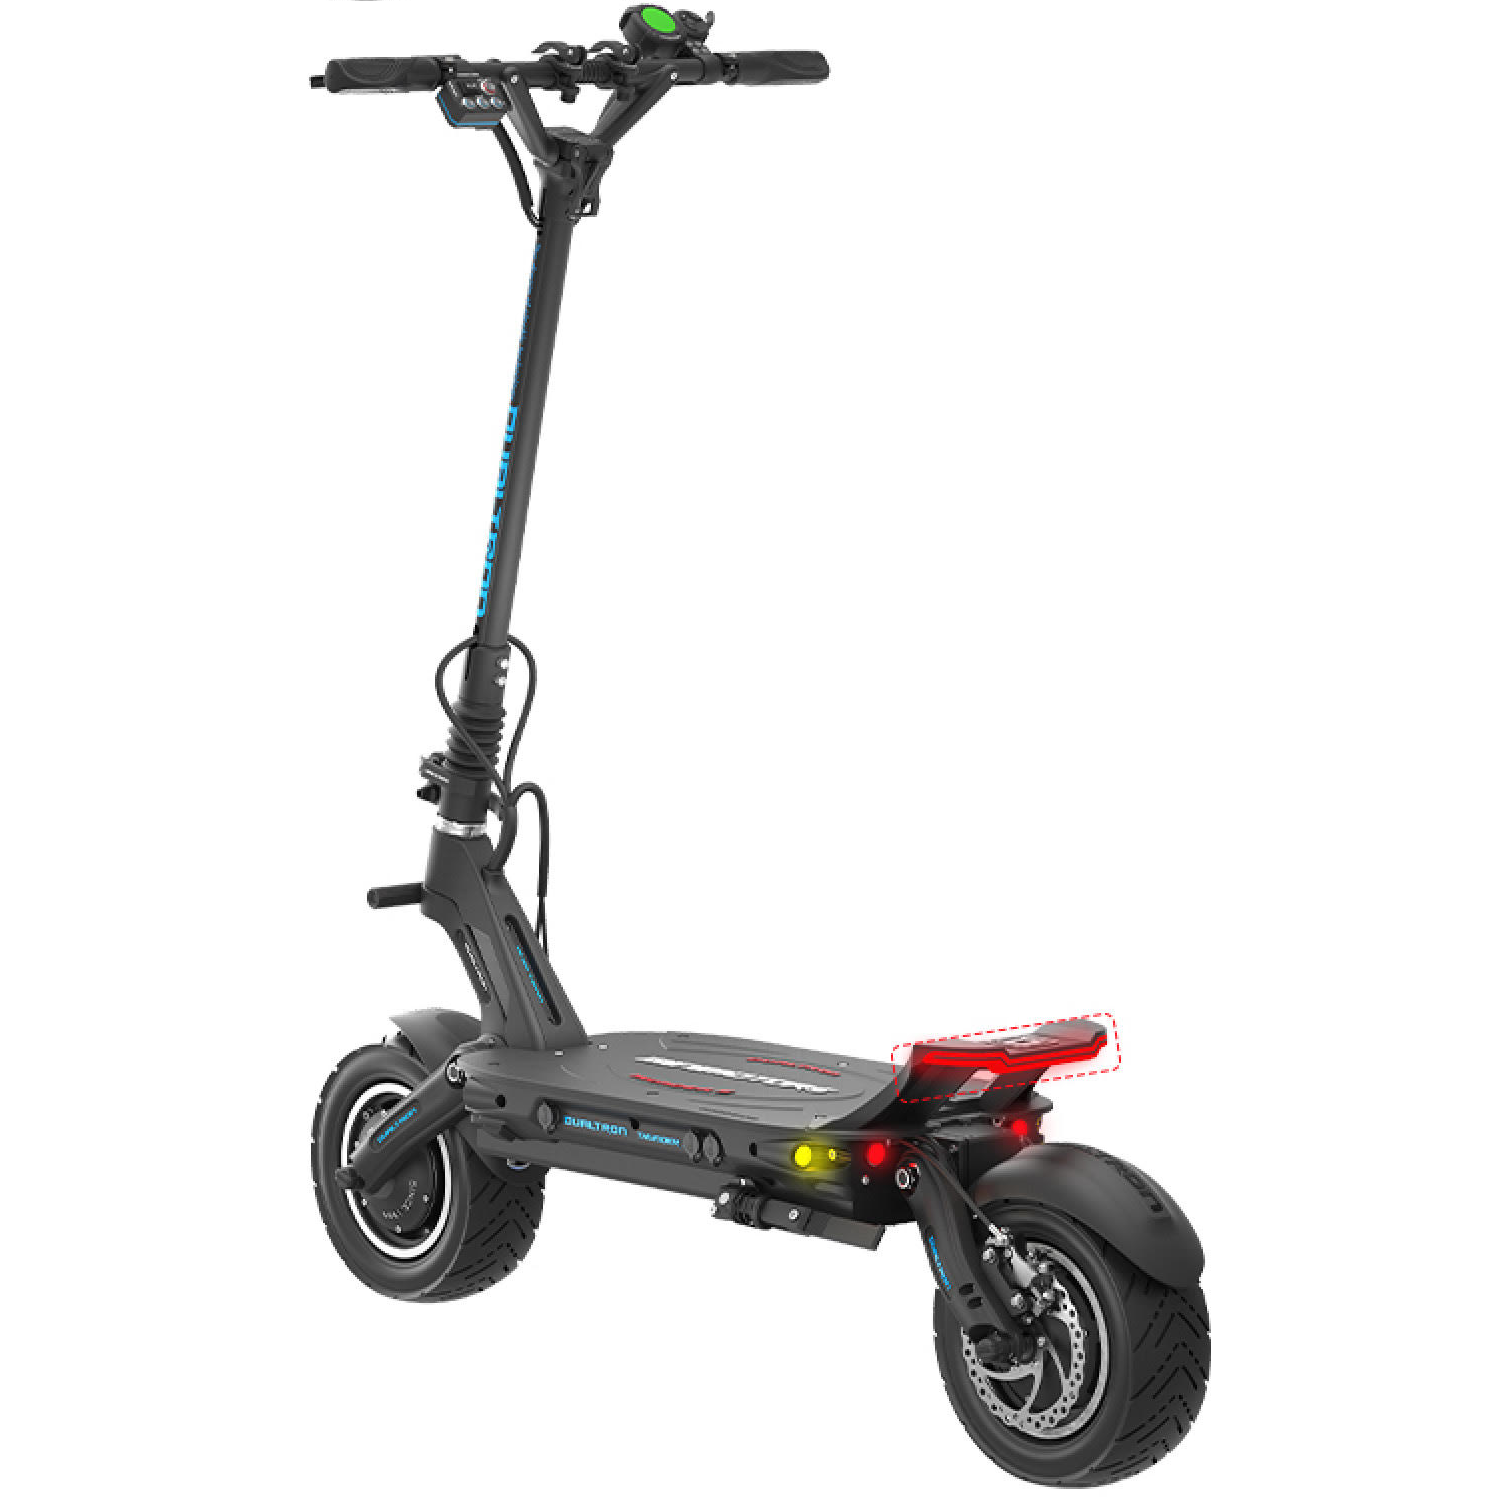 https://dualtron-shop.com/wp-content/uploads/2021/05/Dualtron-Thunder-2-II-Electric-Scooter-Full-Profile.png